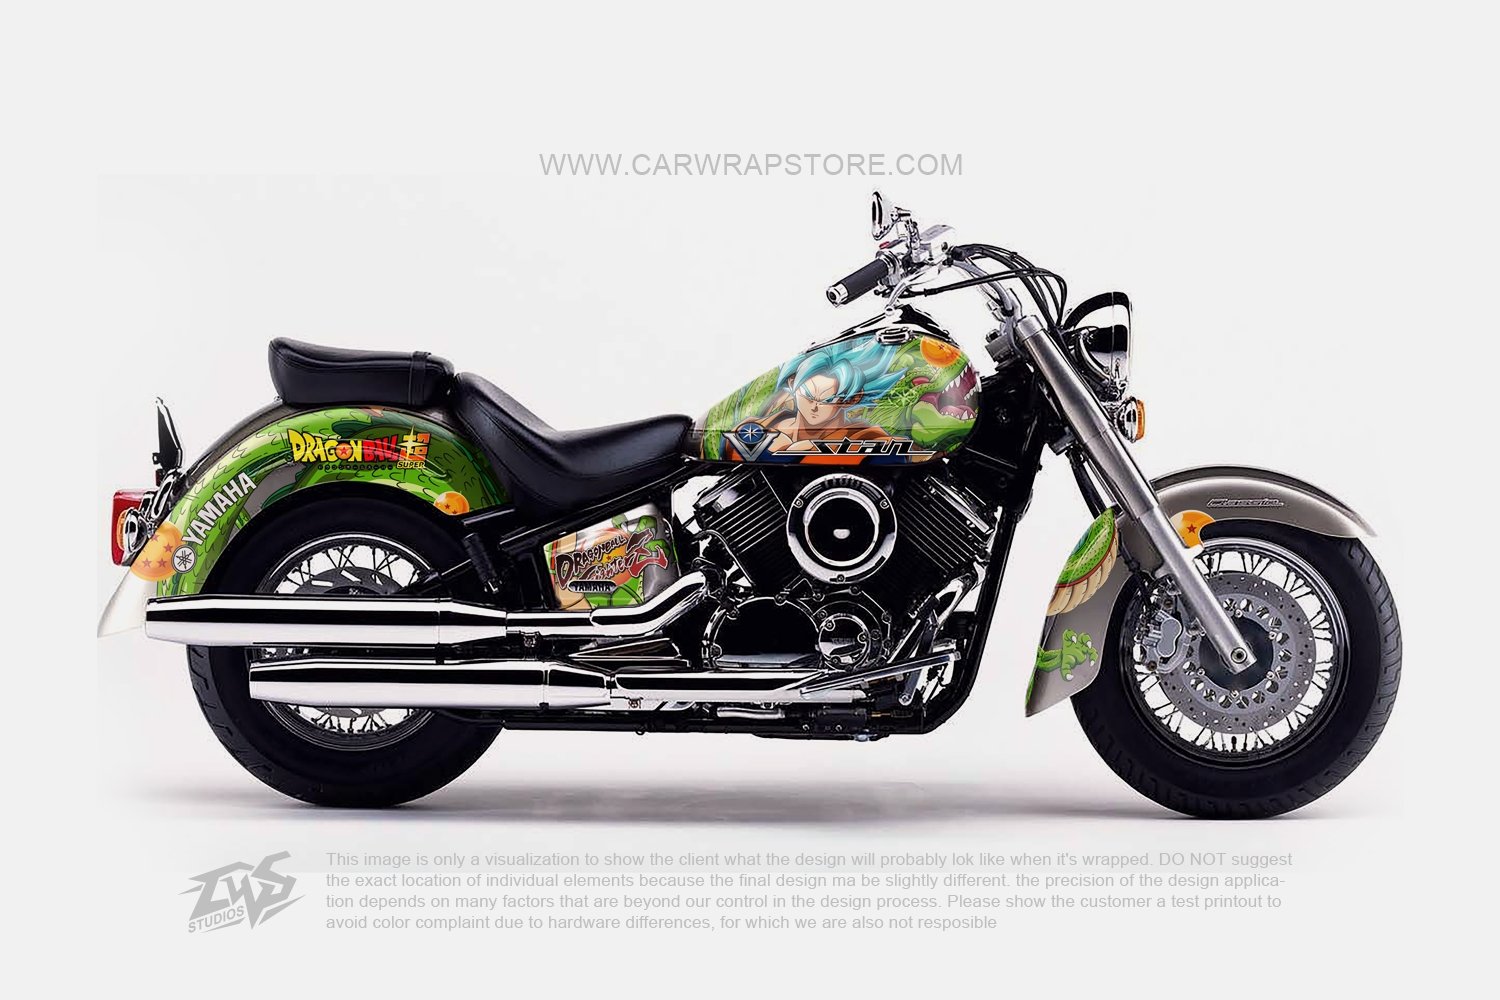 Get an Itasha Motorcycle Wrap for Your Ride  10KWRAPS